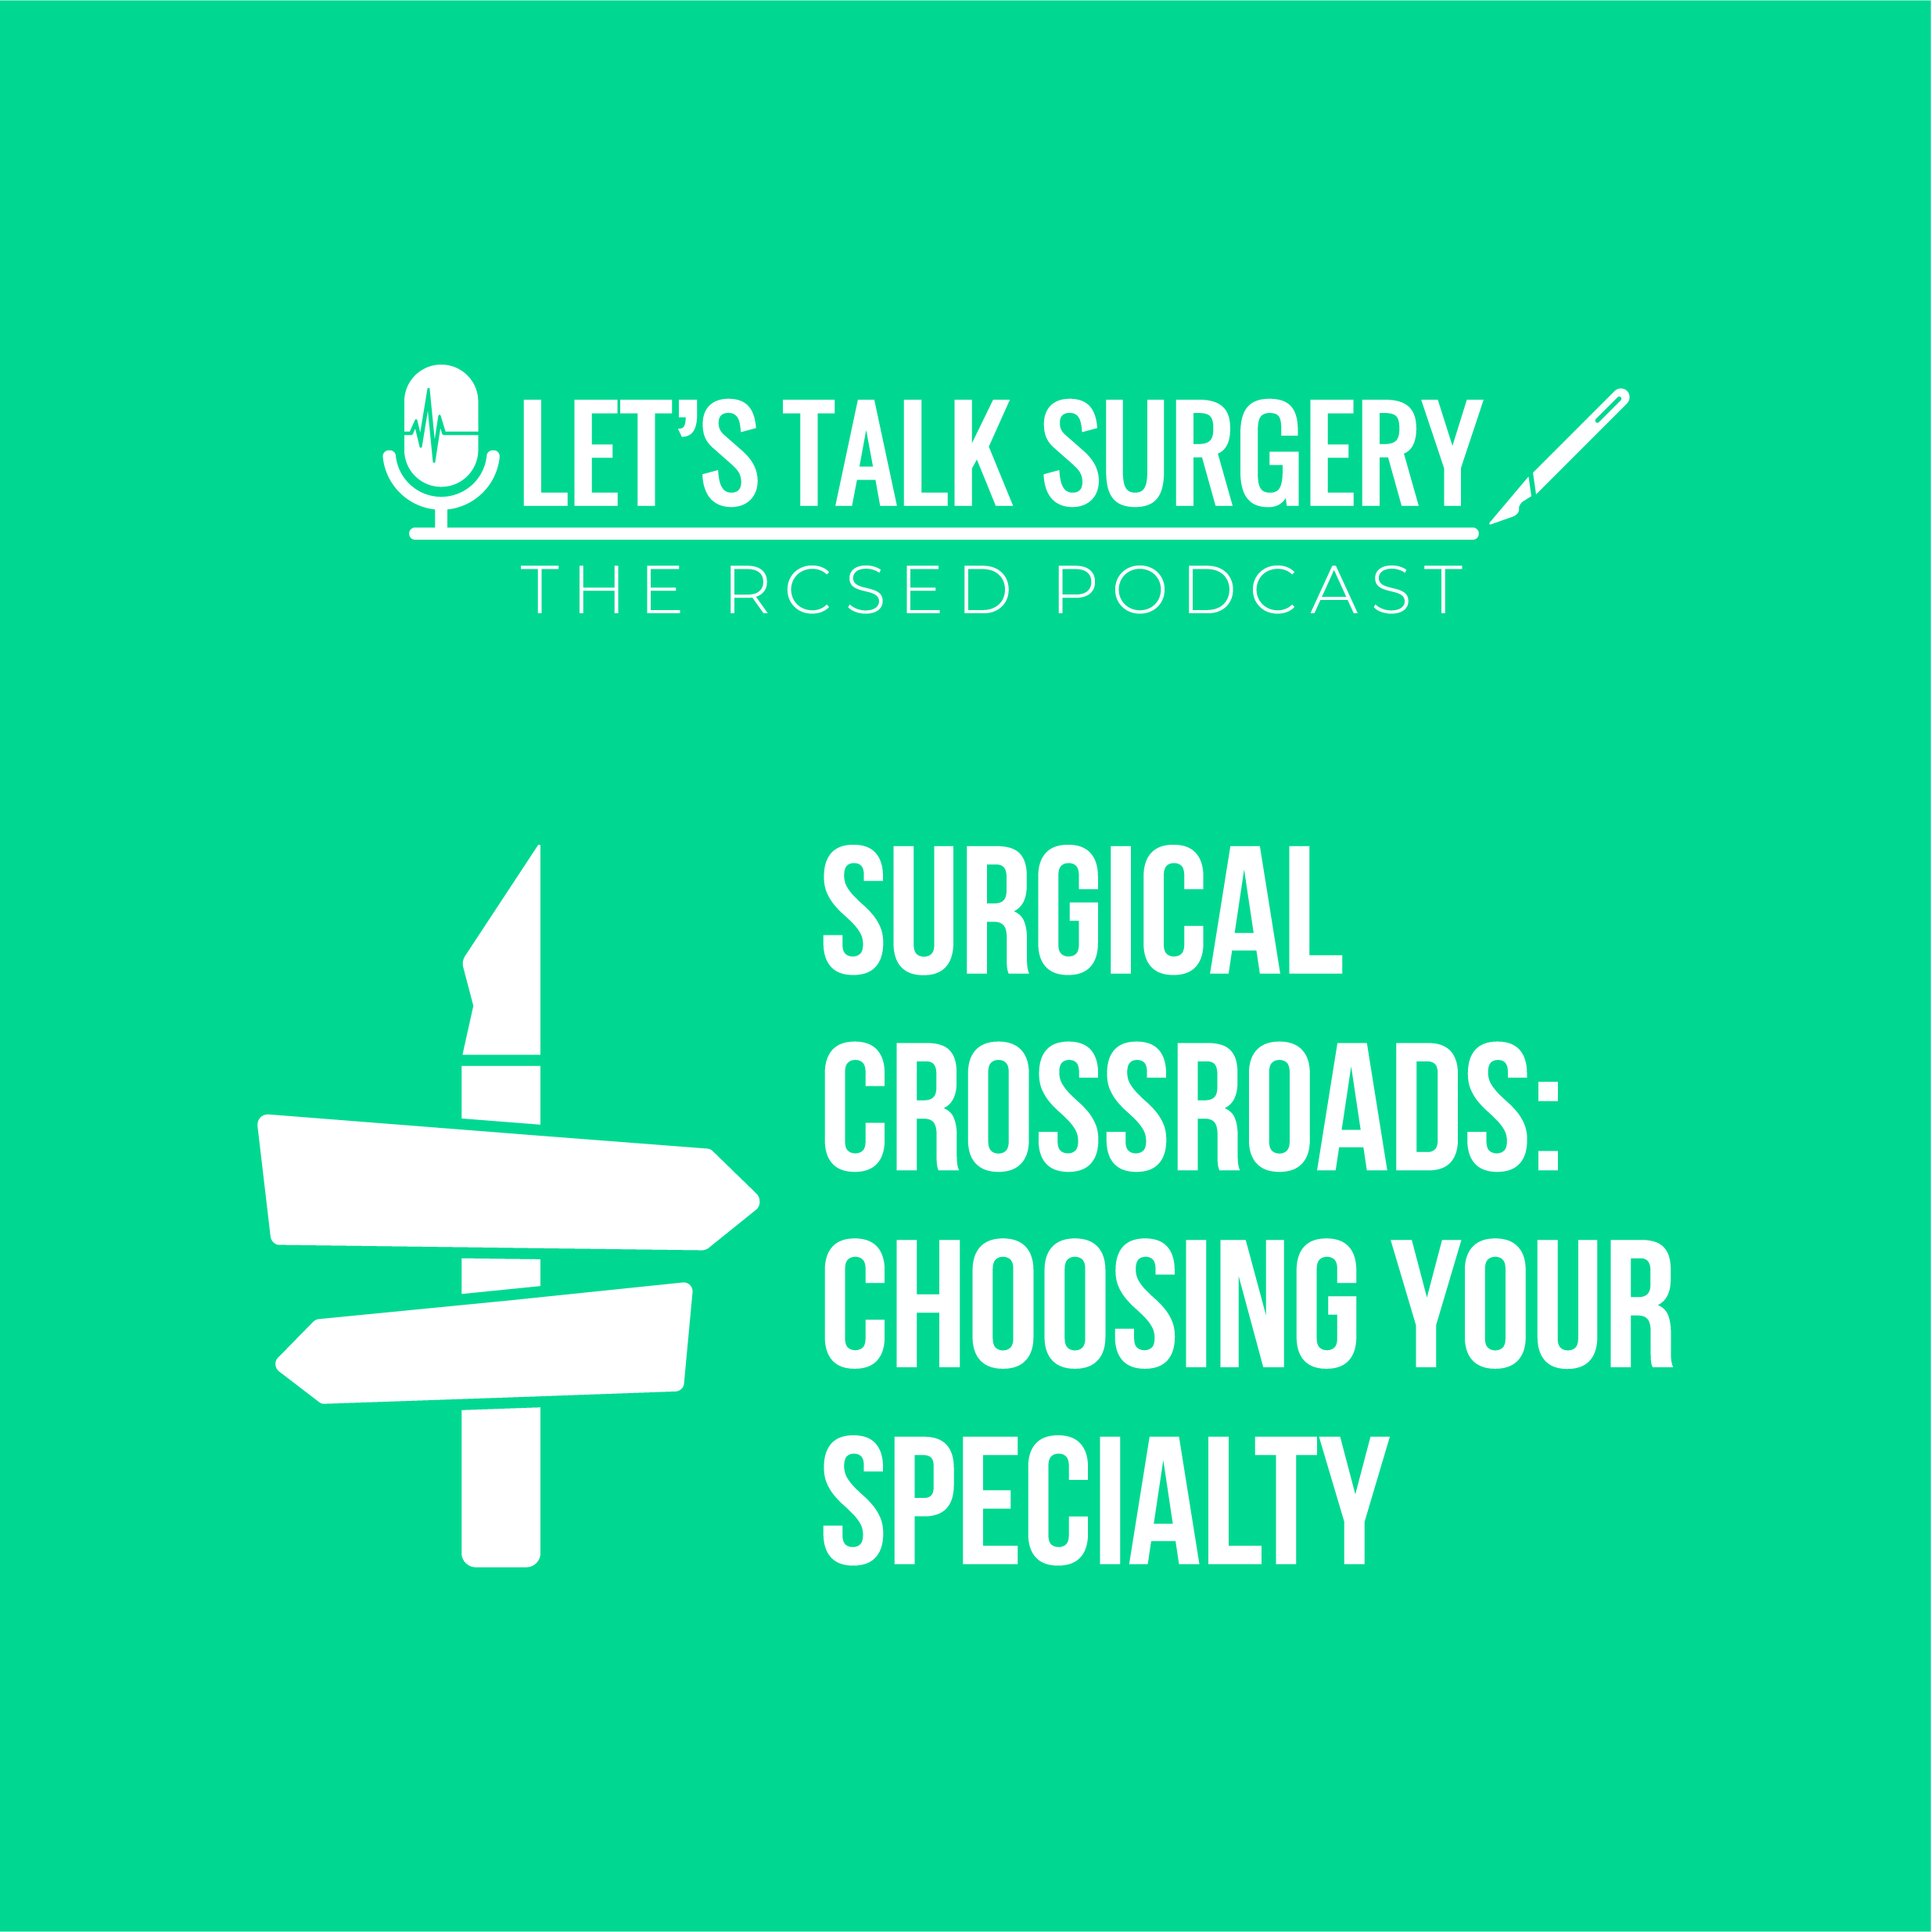 Let's Talk Surgery Podcast, Surgical Crossroads: "Choosing your specialty - the Urology episode"